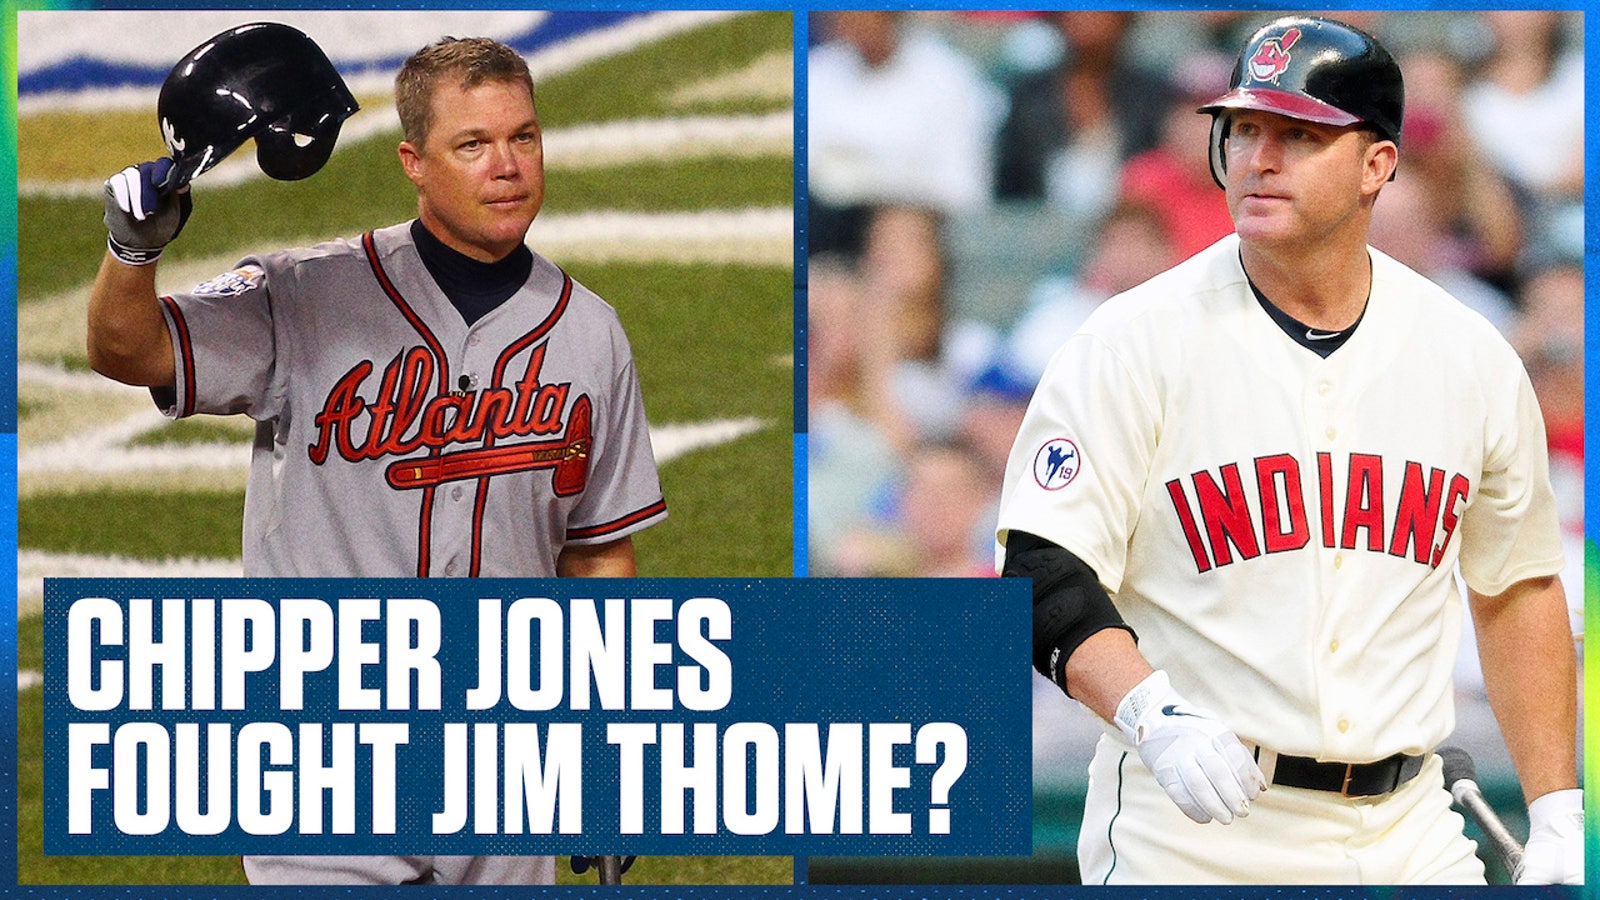 Chipper Jones tells the story of his brawl with Jim Thome and Manny Ramirez